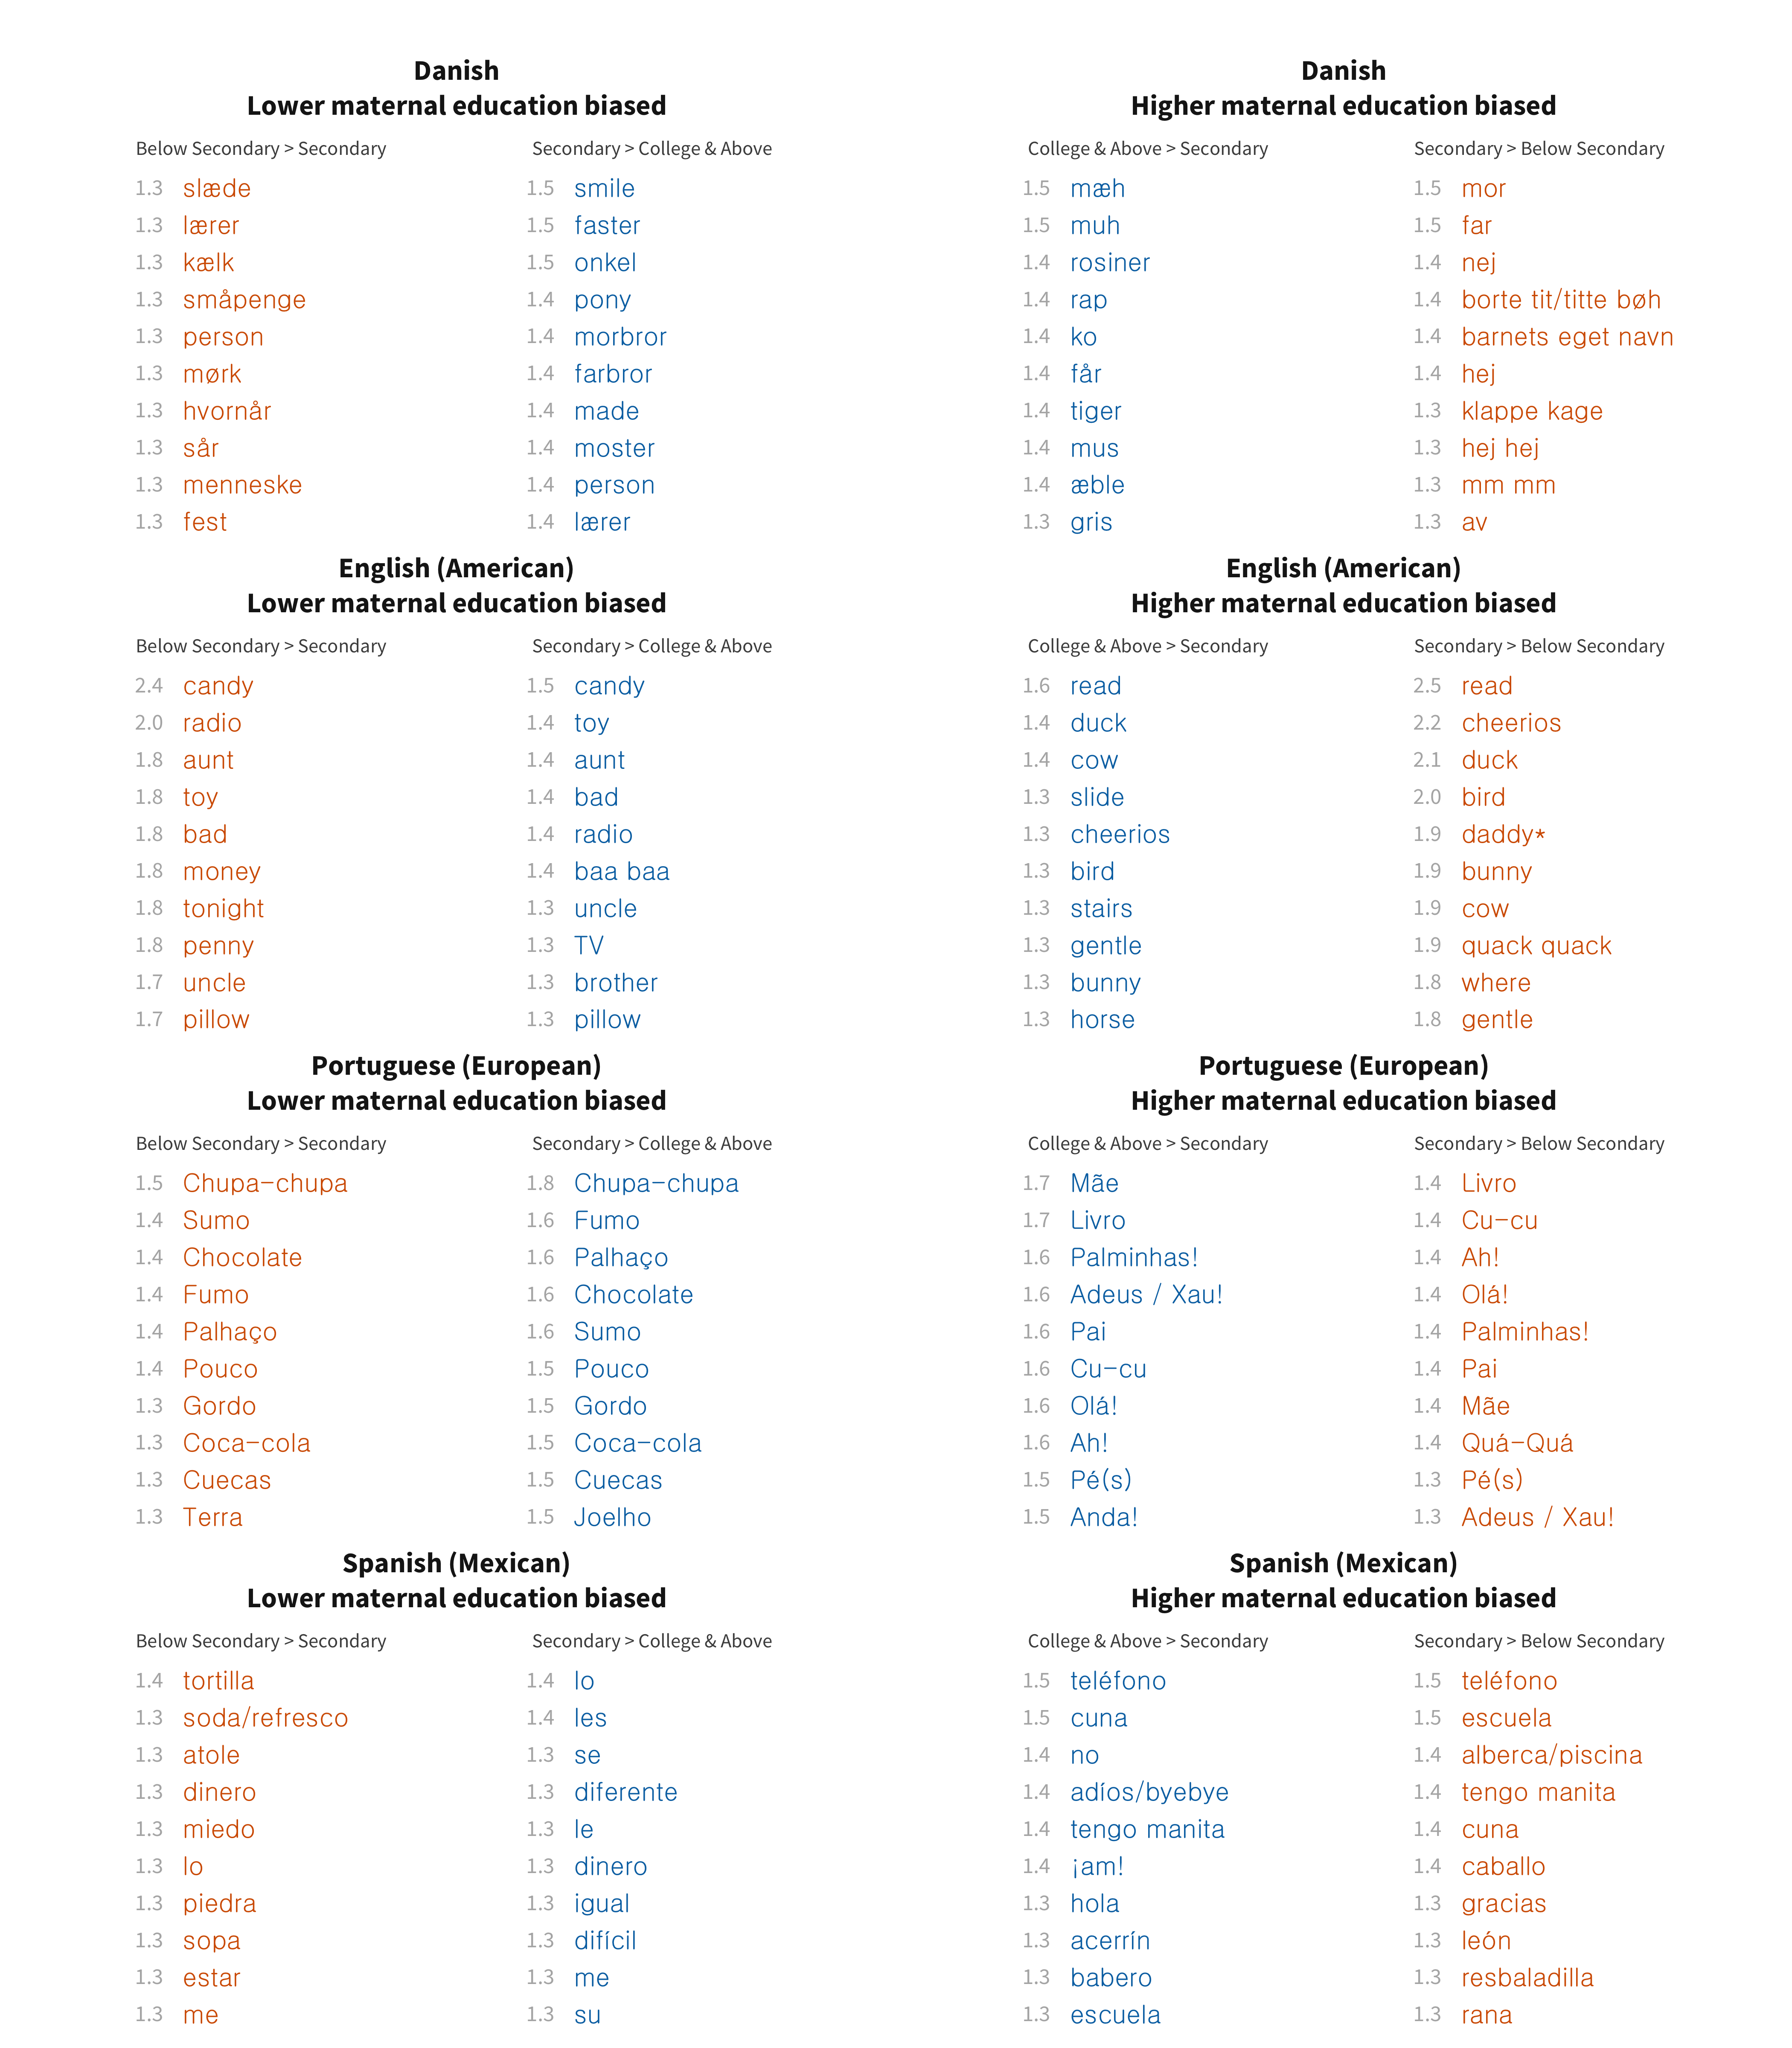 Top 10 most maternal education biased words in each language for production data.